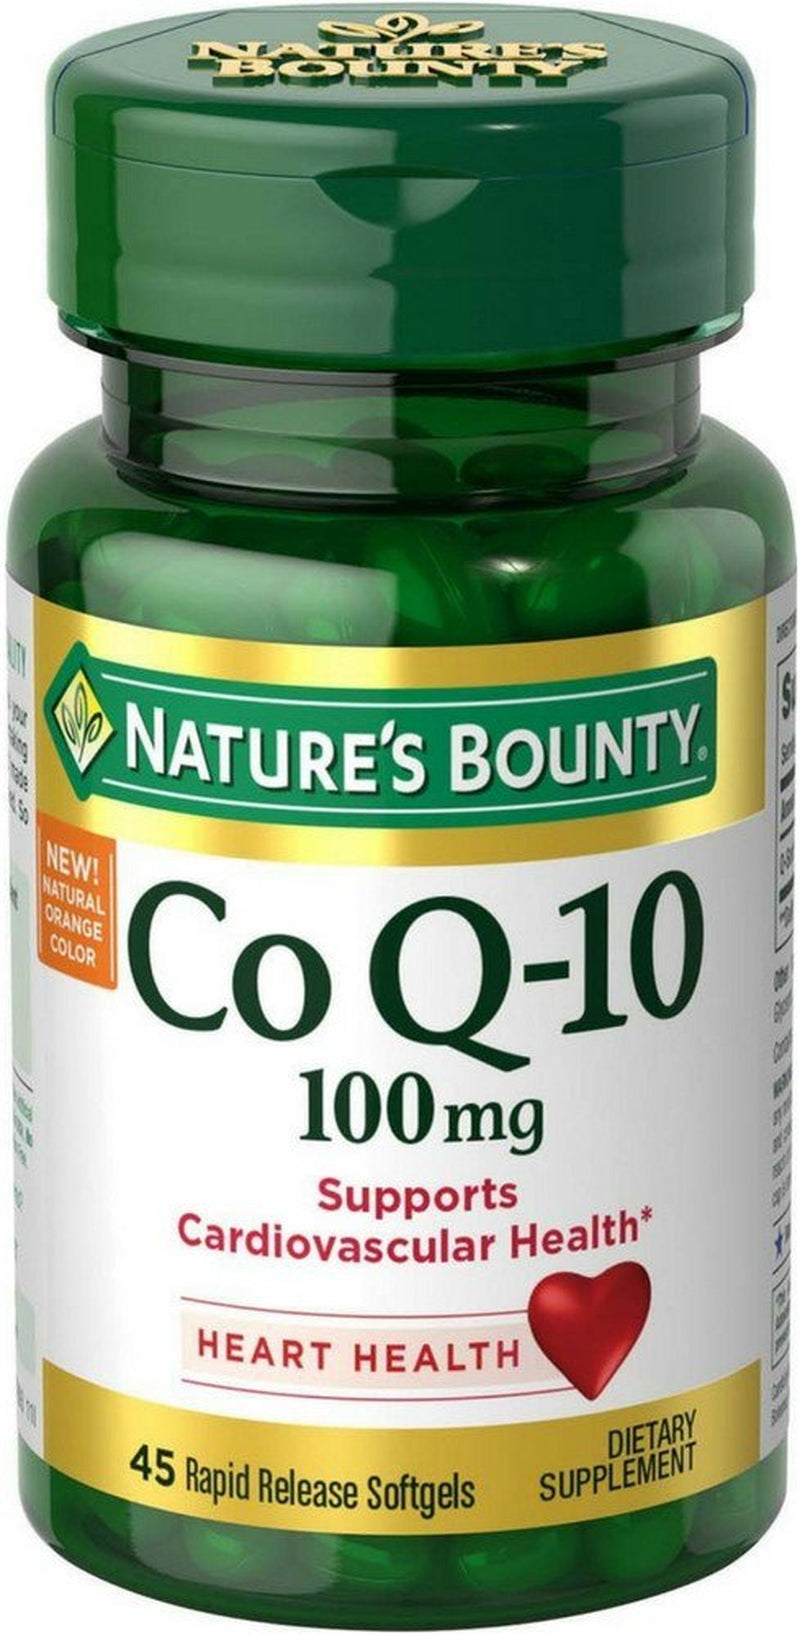 Nature'S Bounty Co Q-10 100Mg 45 Rapid Release Softgels (Pack of 2)